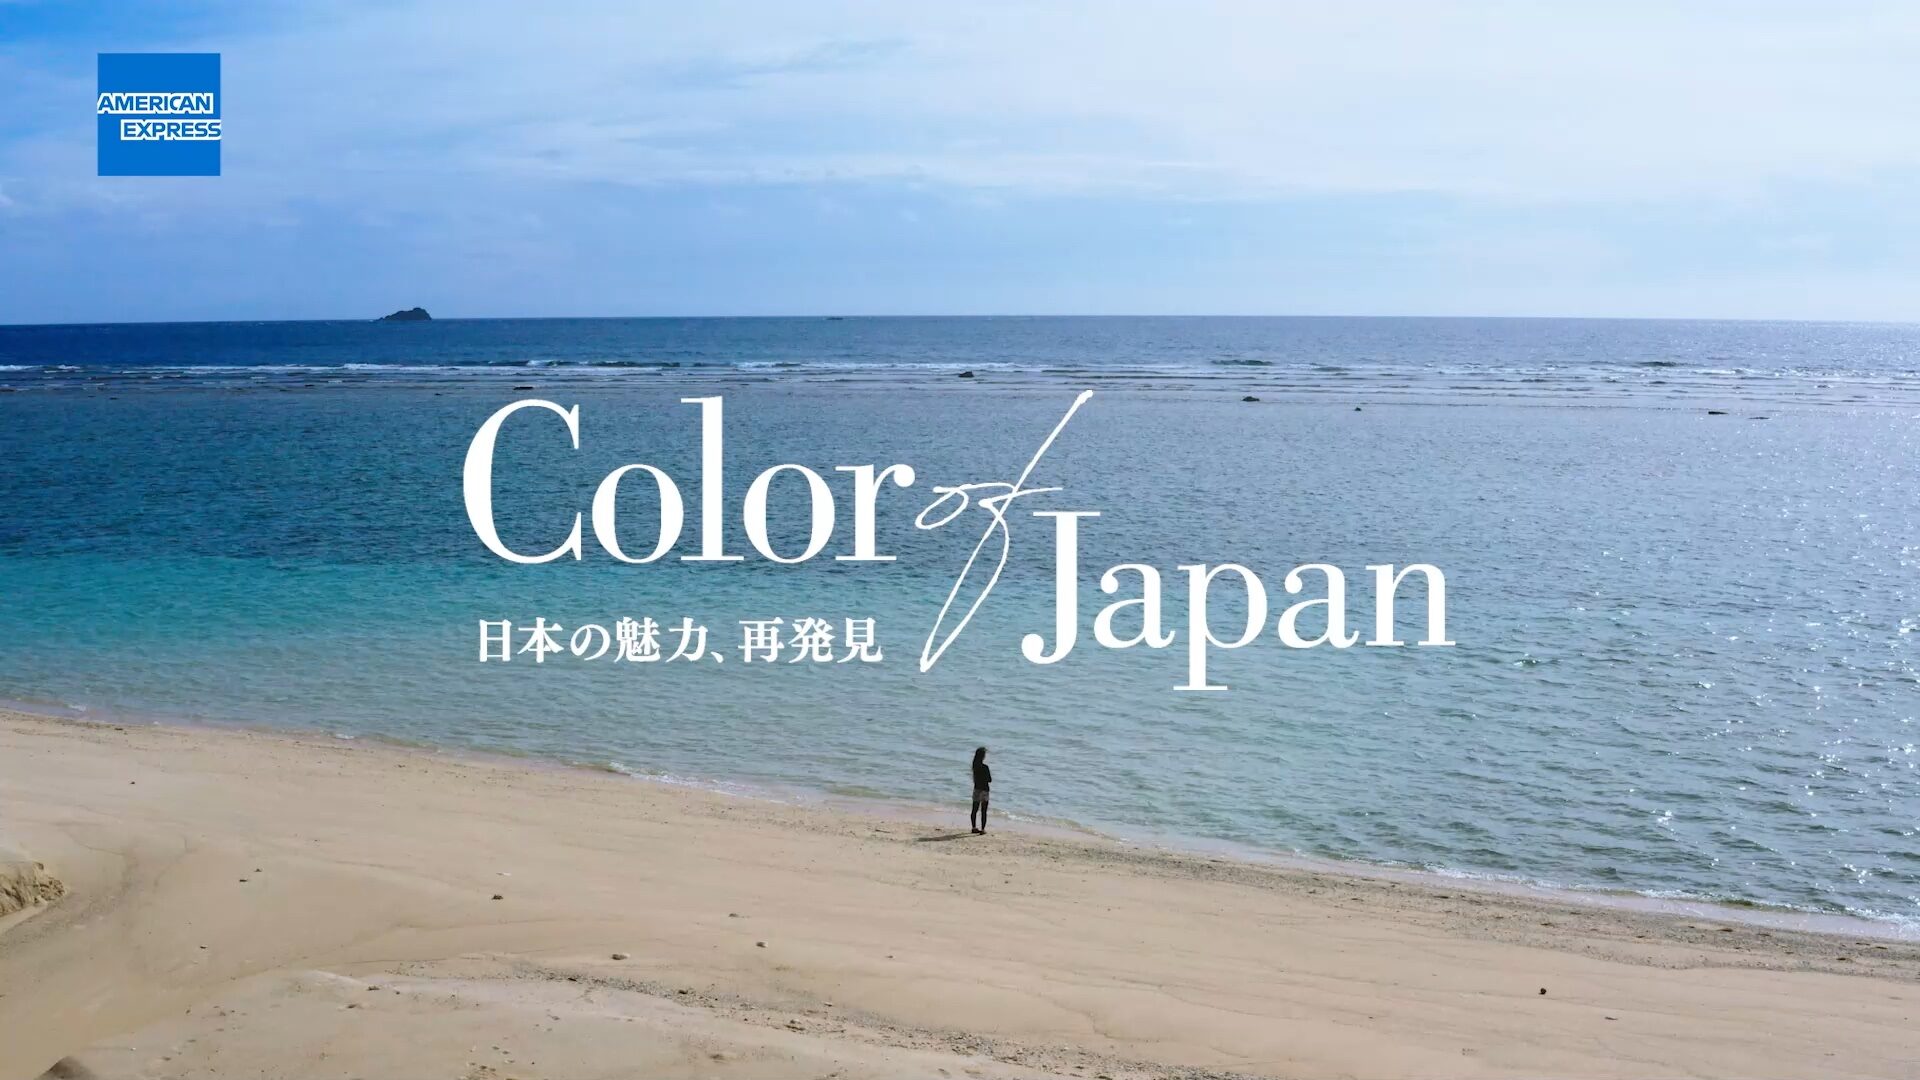 American Express 「Color of Japan」 